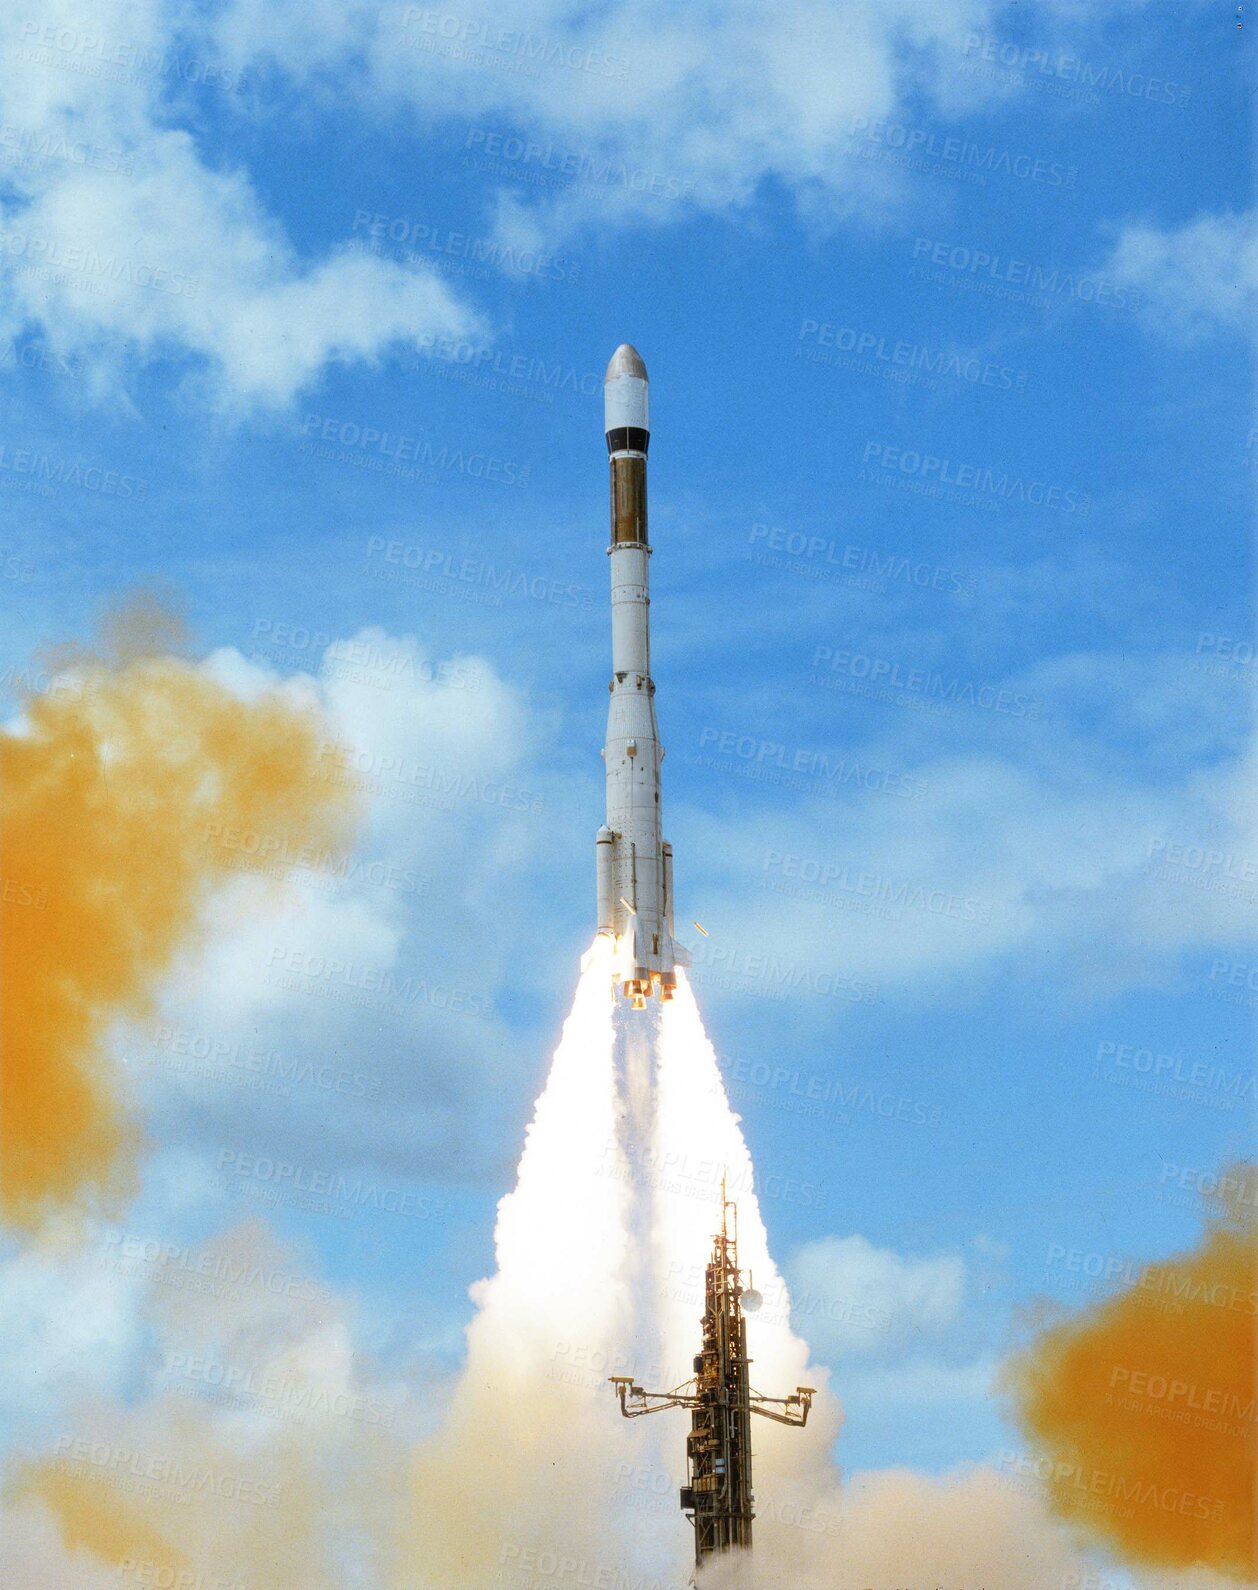 Buy stock photo Rocket launch into sky, dust cloud and travel on space mission for research, exploration and discovery in cosmos. Science, aerospace innovation or technology, spaceship in flight with flame and fuel.